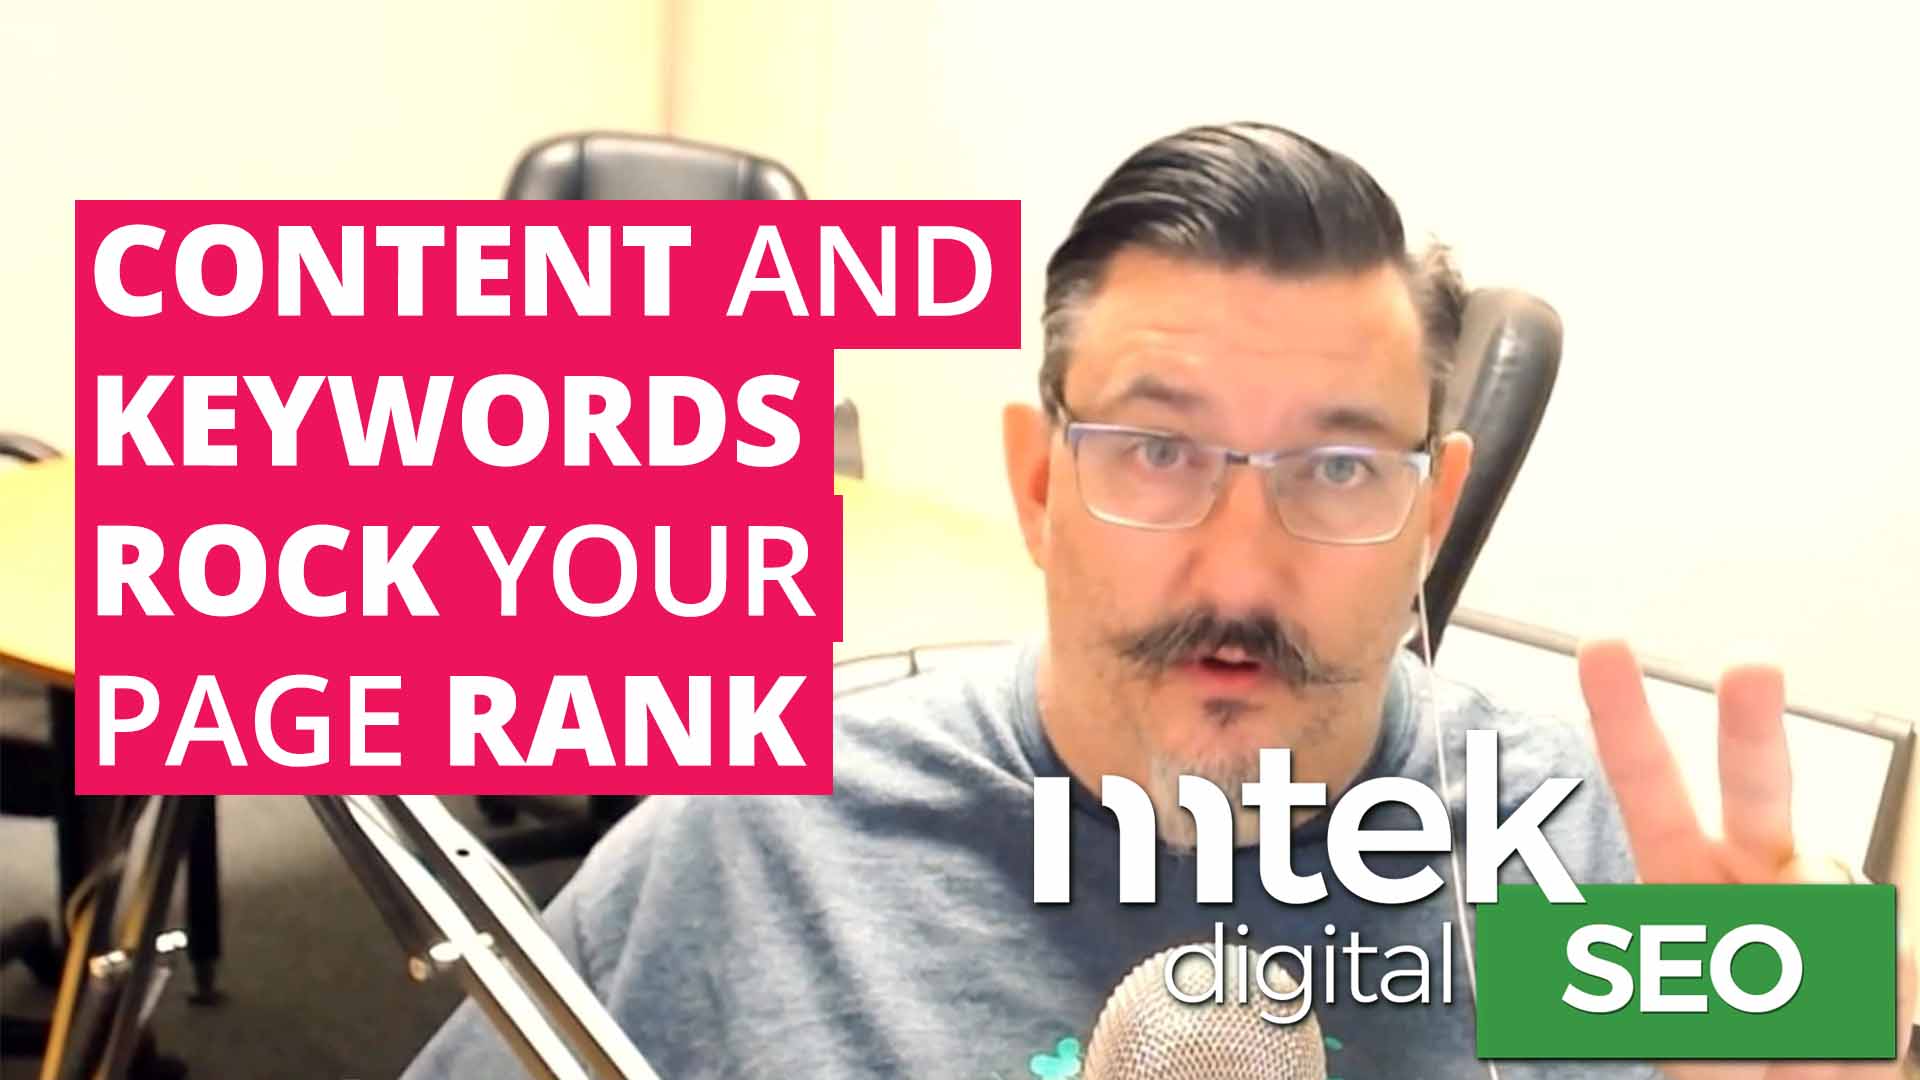 Greg Scratchley Keywords for Page Rank